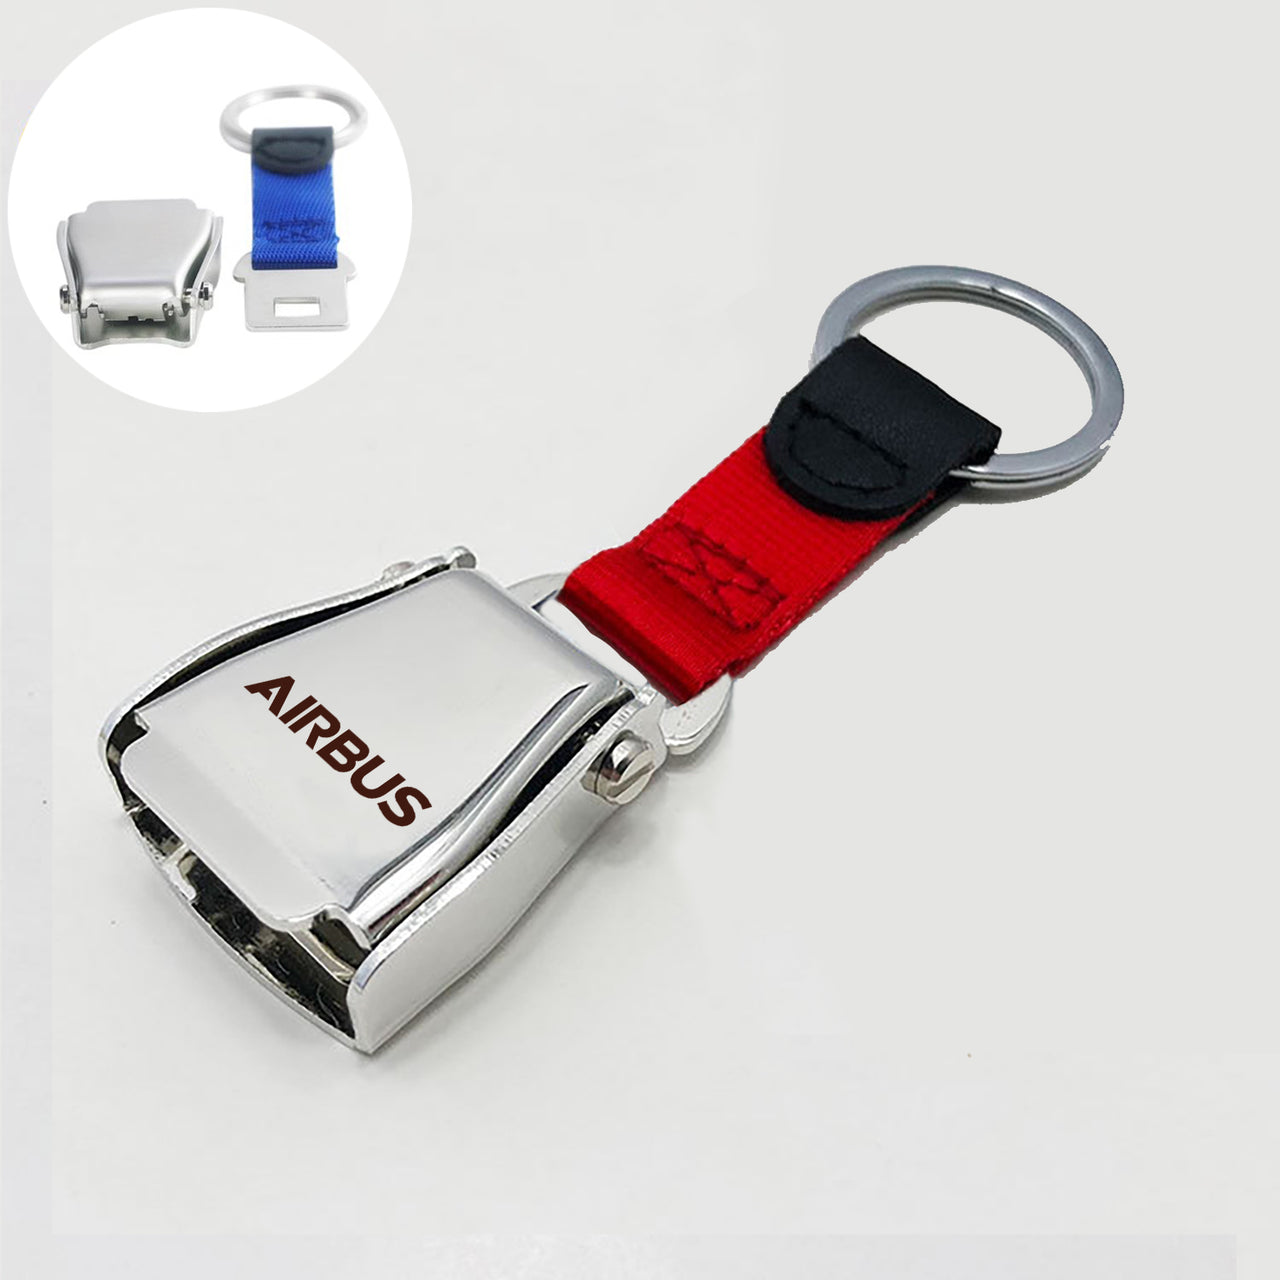 Airbus & Text Designed Airplane Seat Belt Key Chains